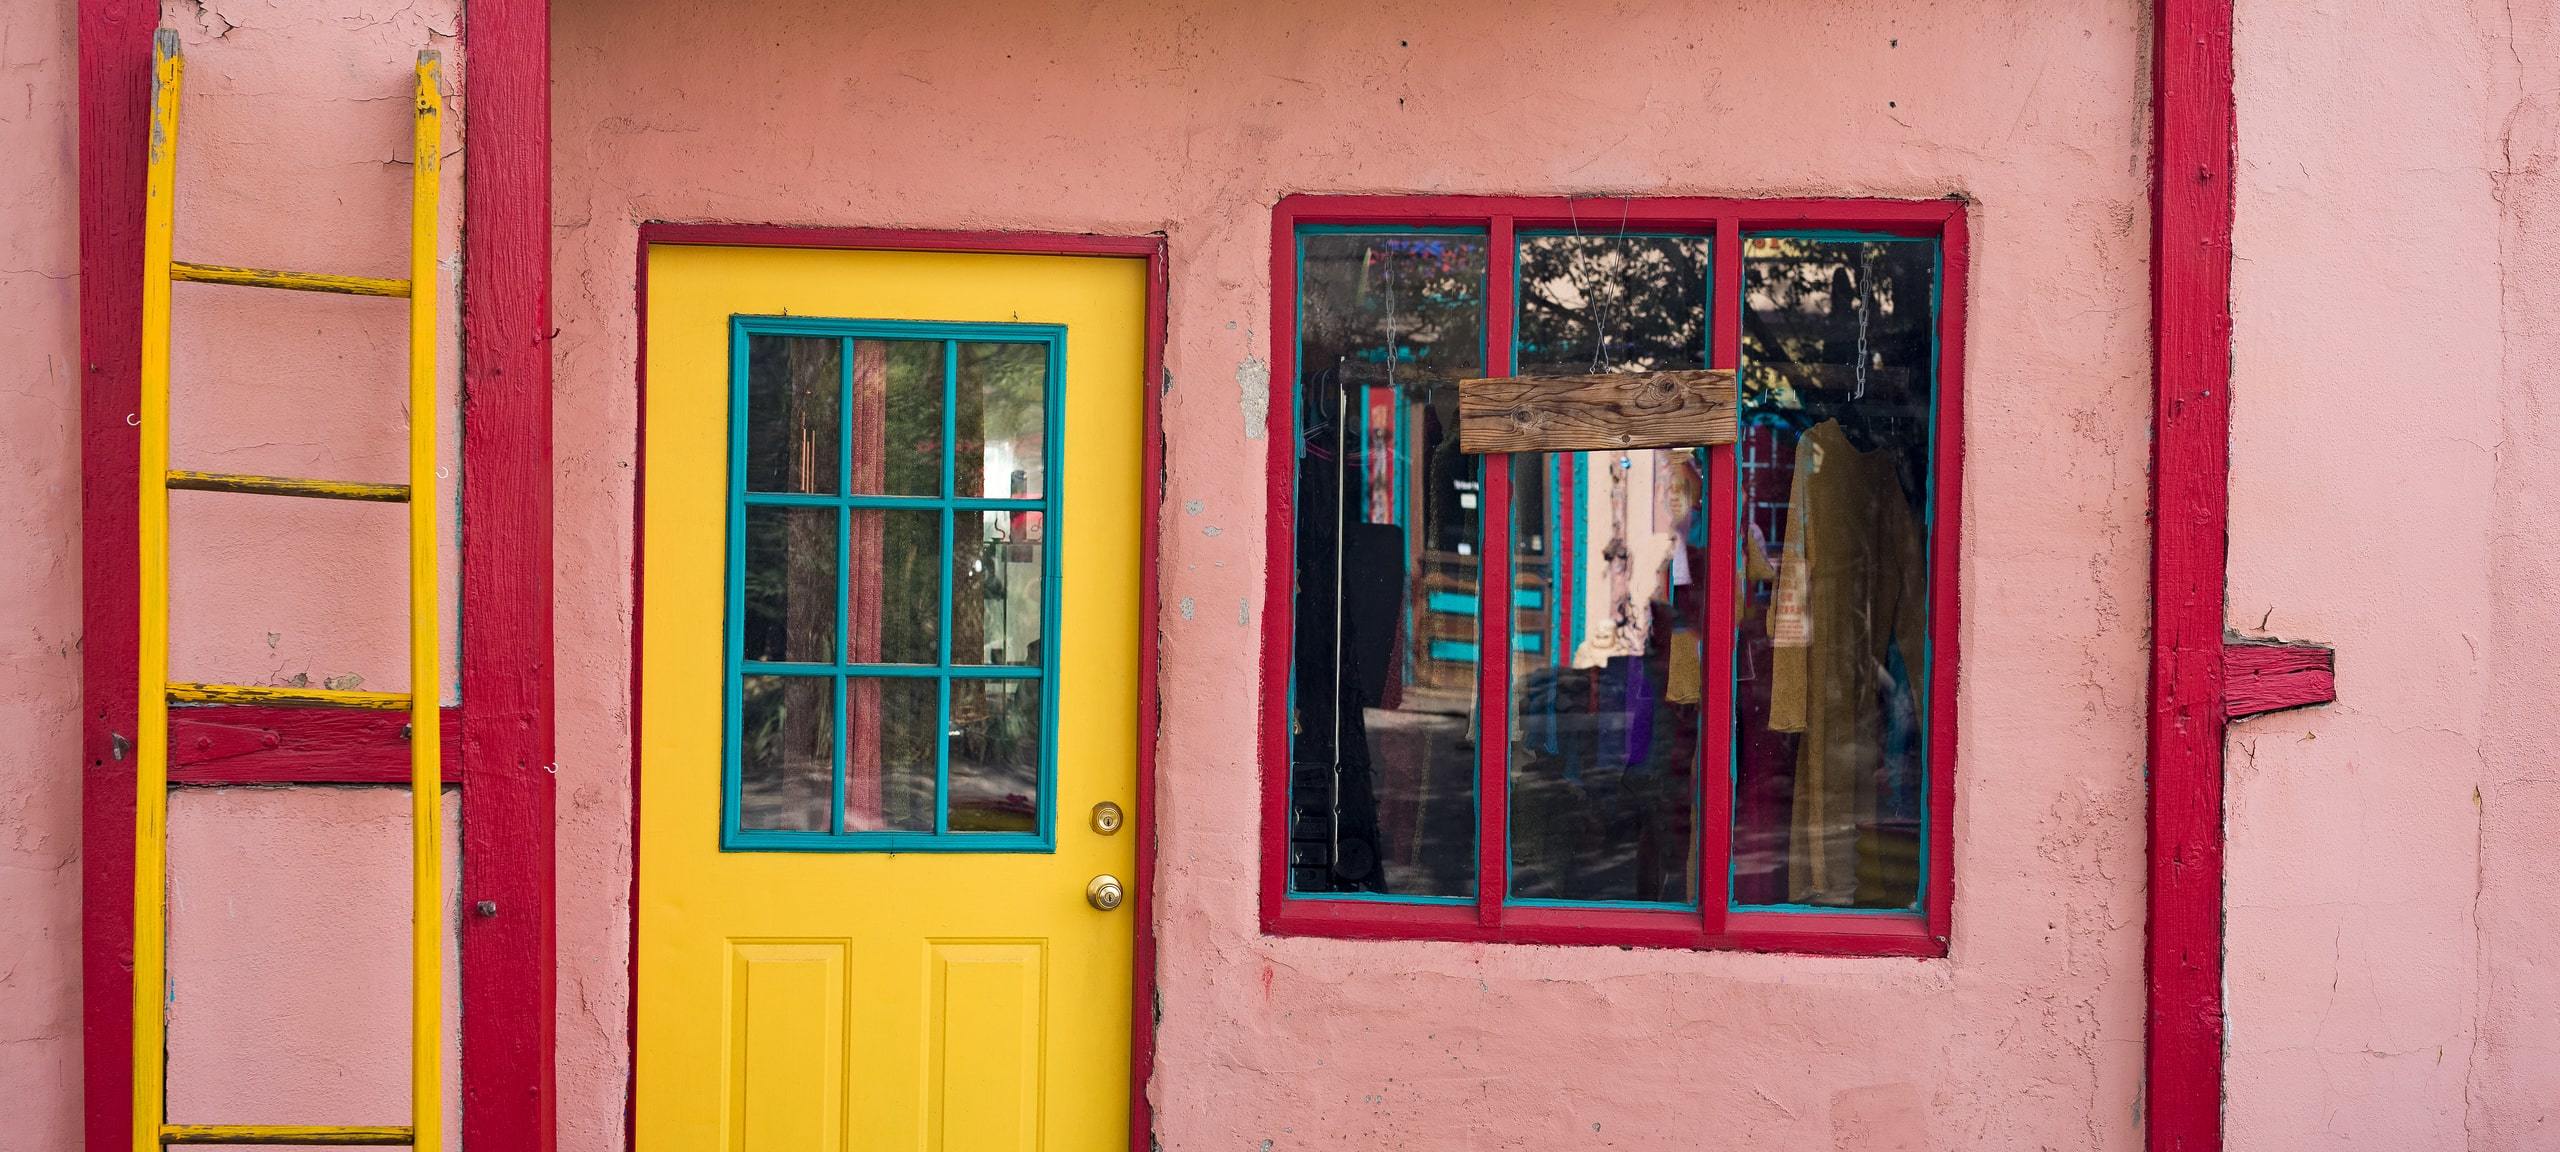 Colorful shop exterior in Madrid, New Mexico